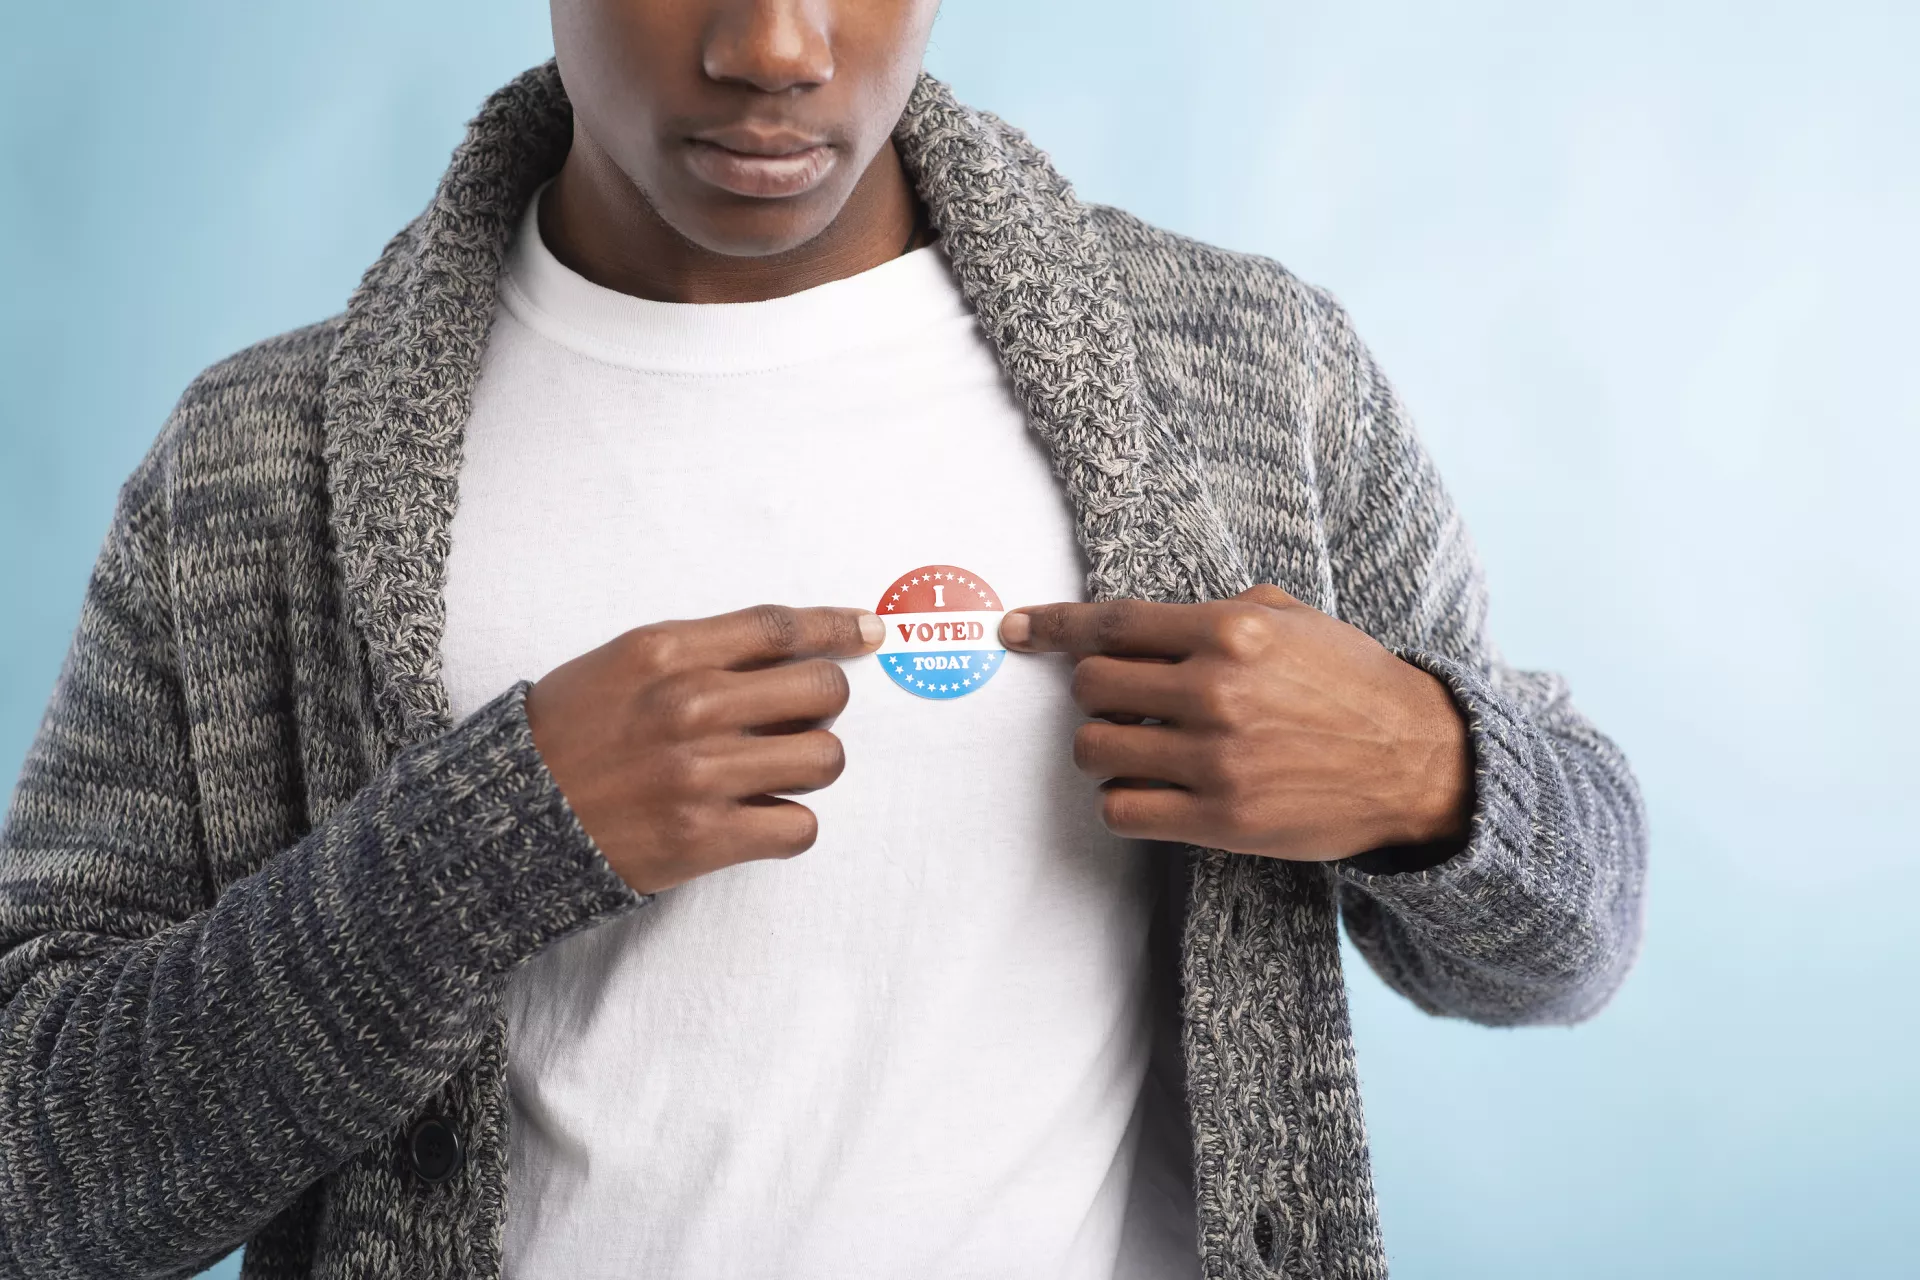 Person with an 'I Voted' sticker